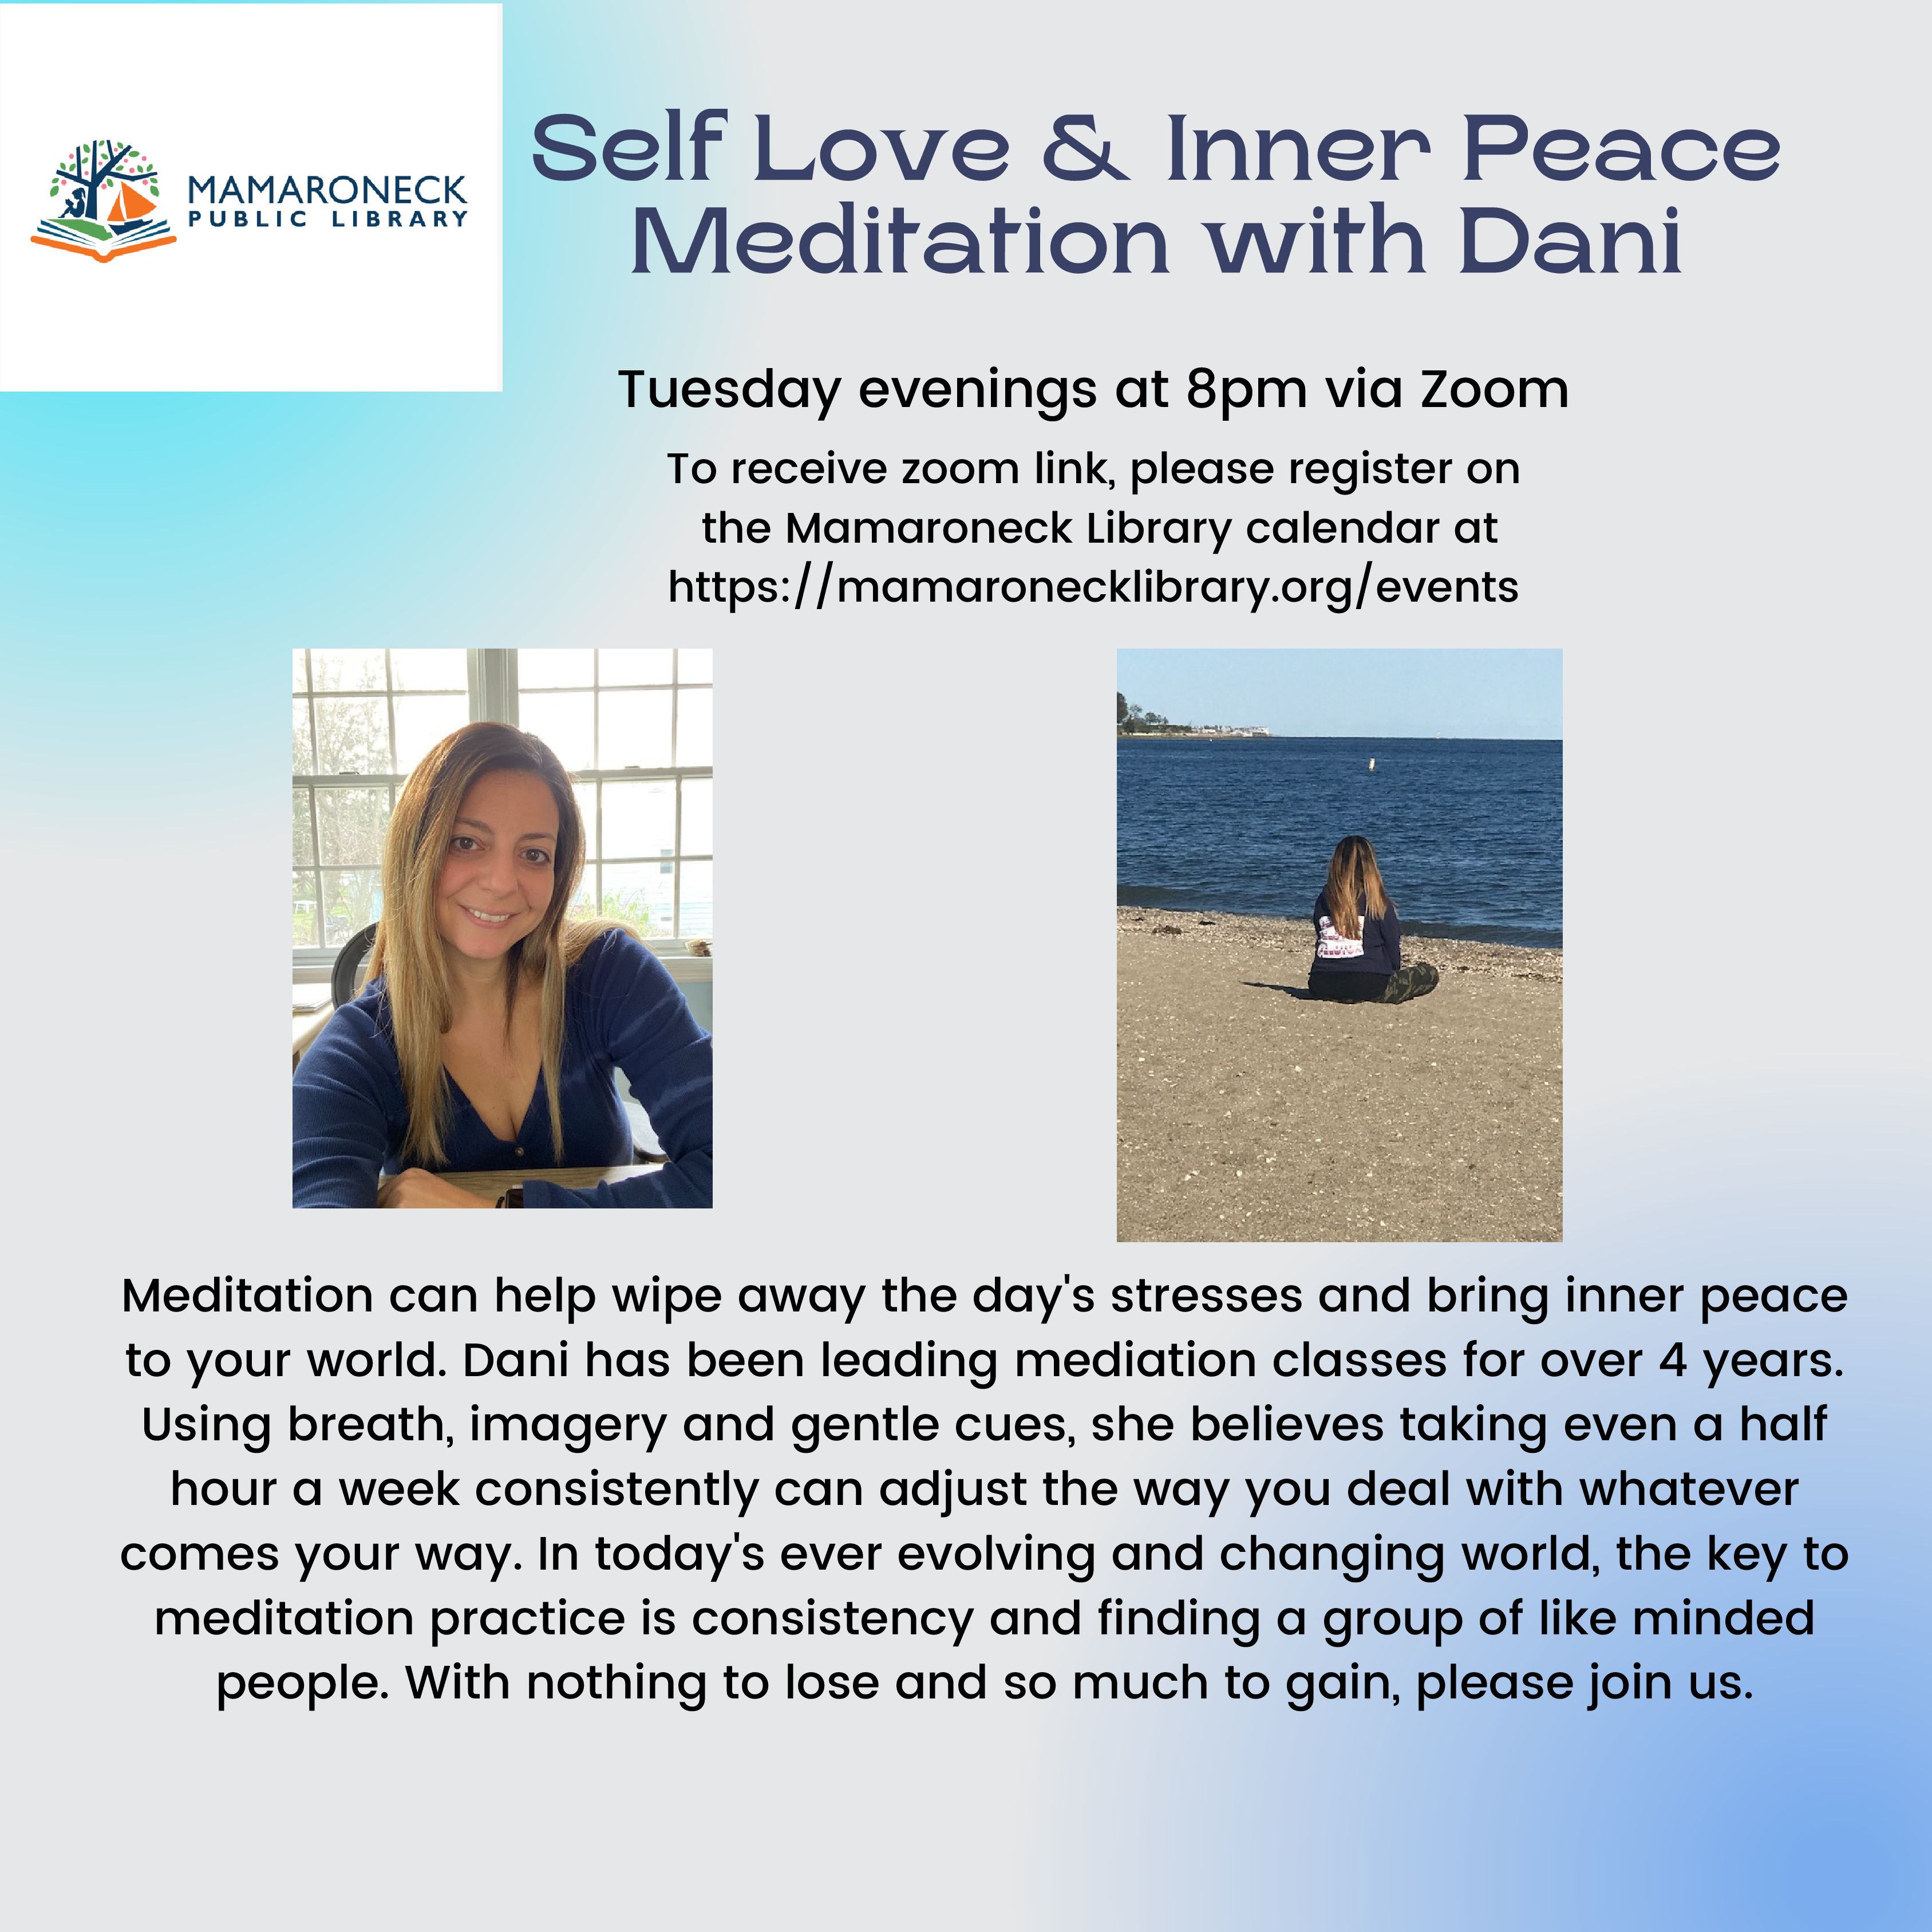 Self Love and Inner Peace meditation with Dani Tuesday nights